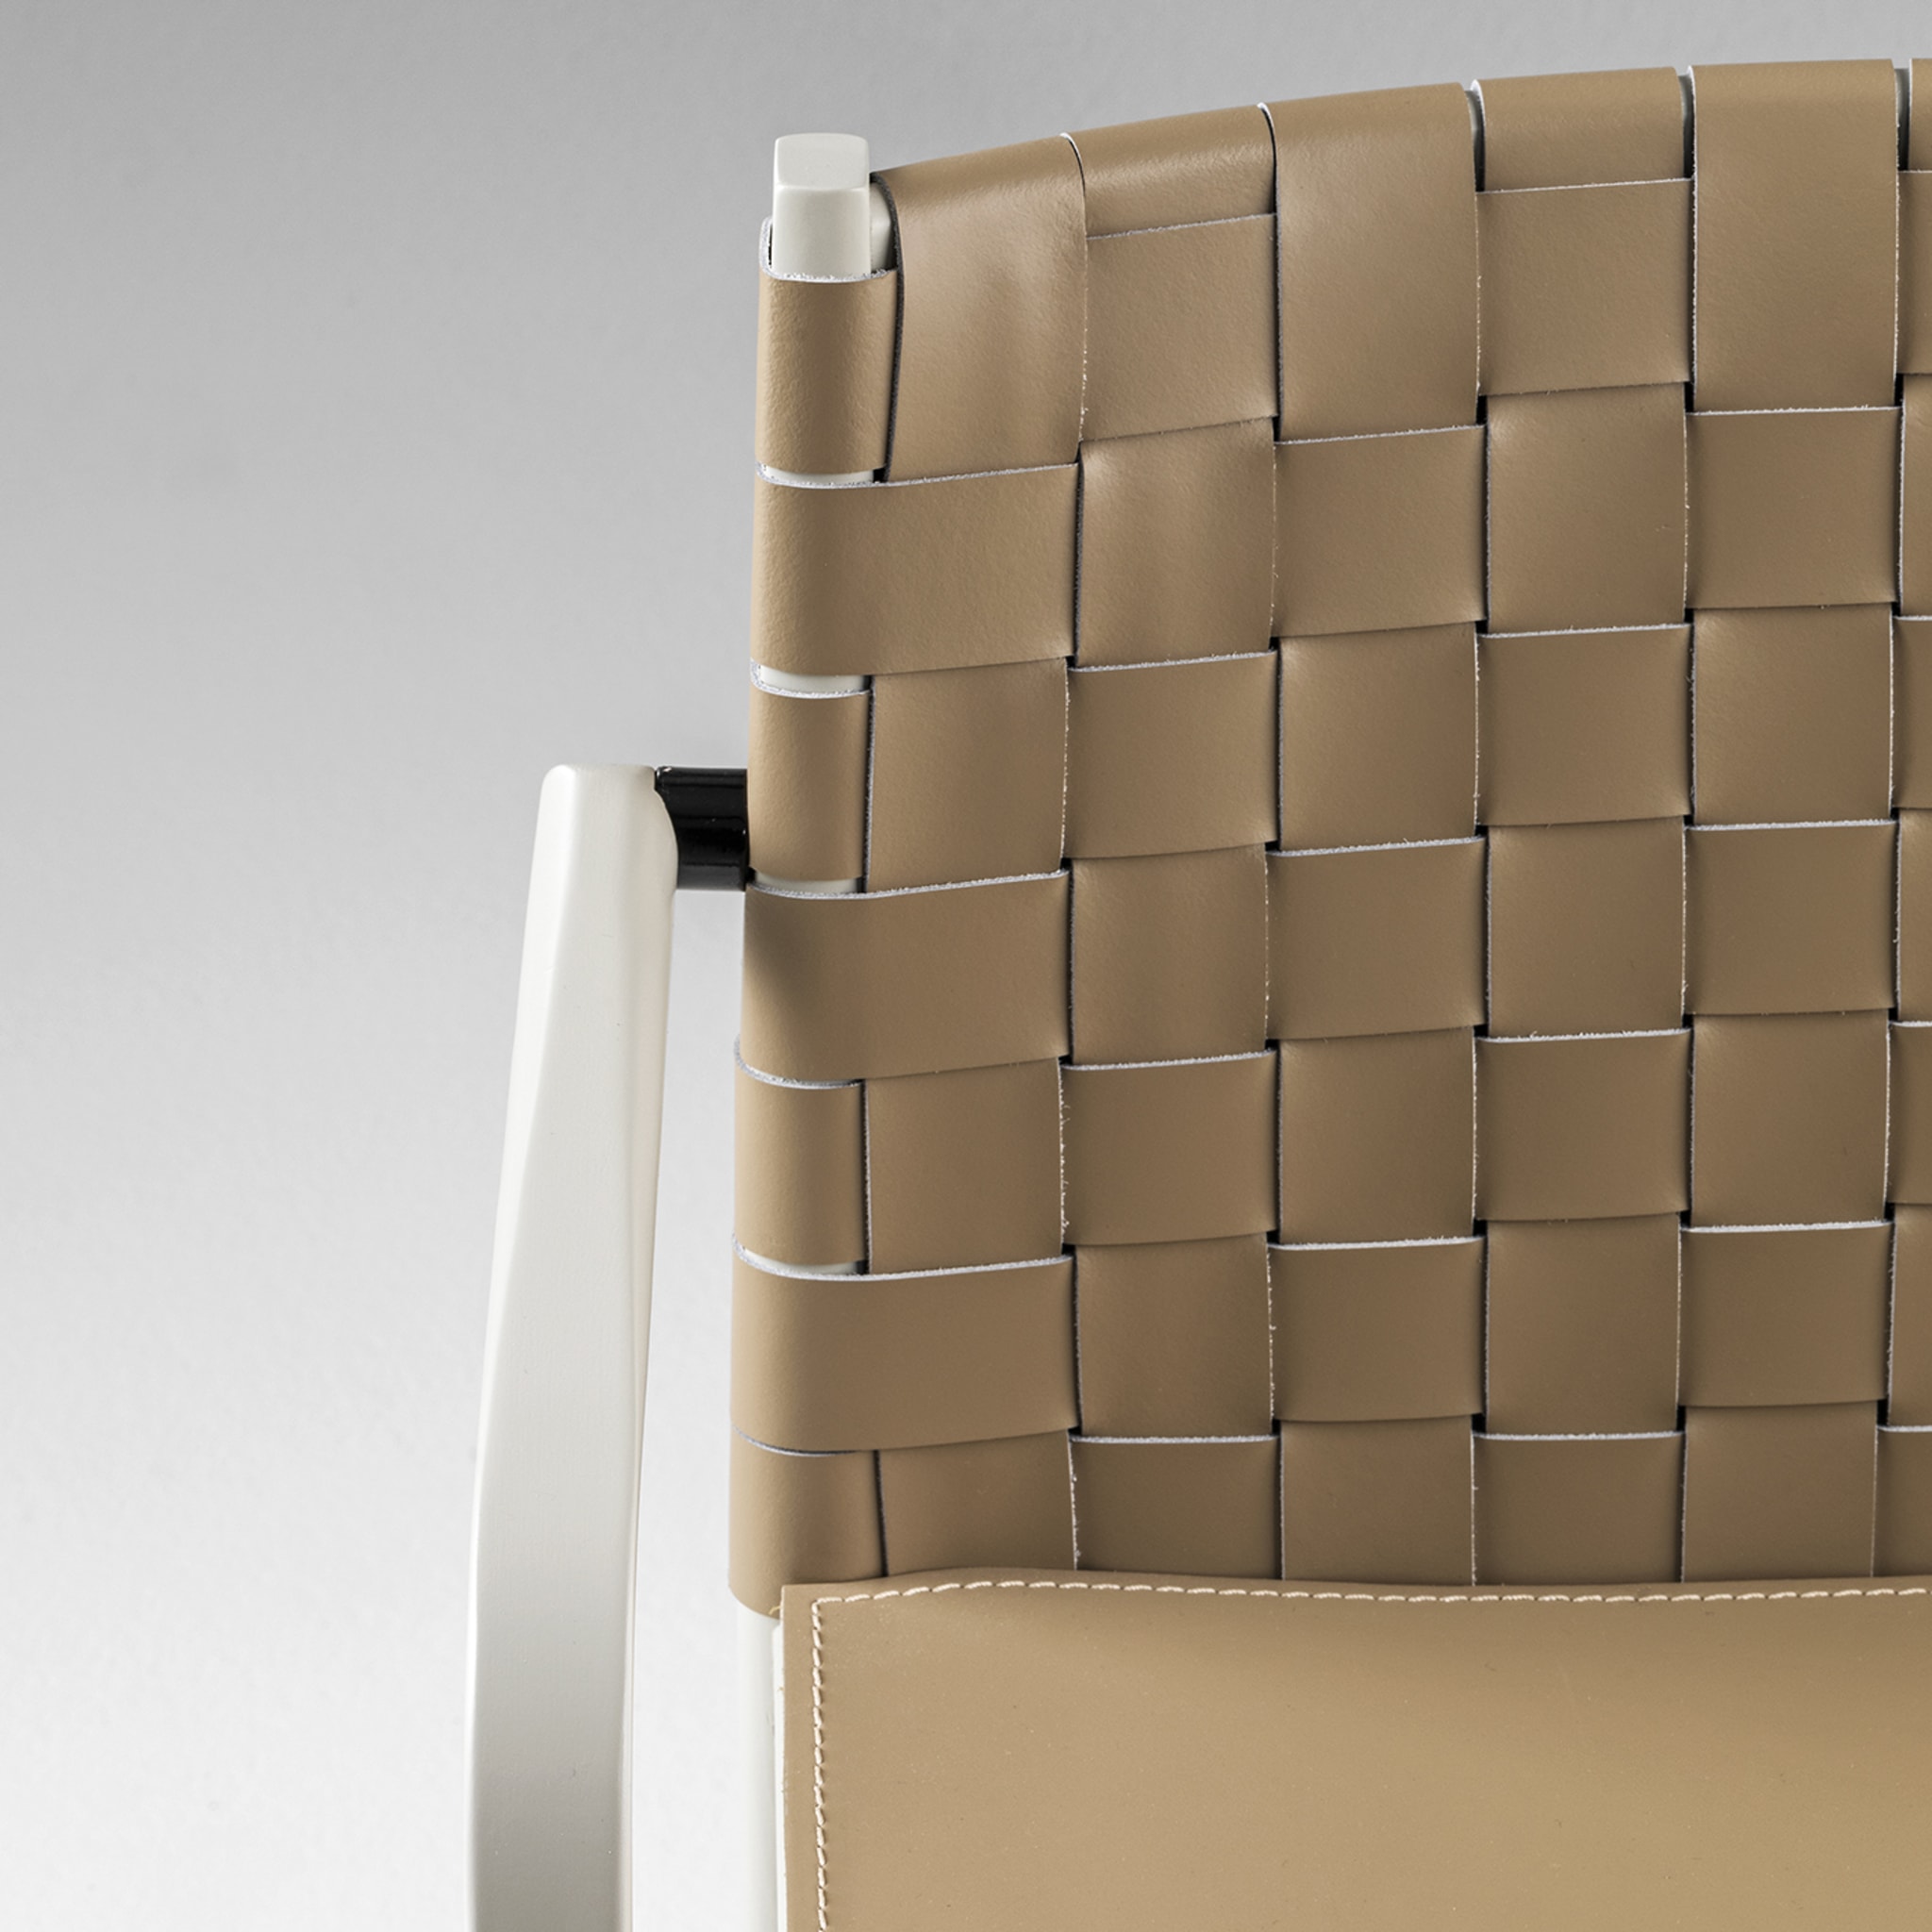 Julie Beige Leather chair with armrests by Emilio Nanni - Alternative view 1